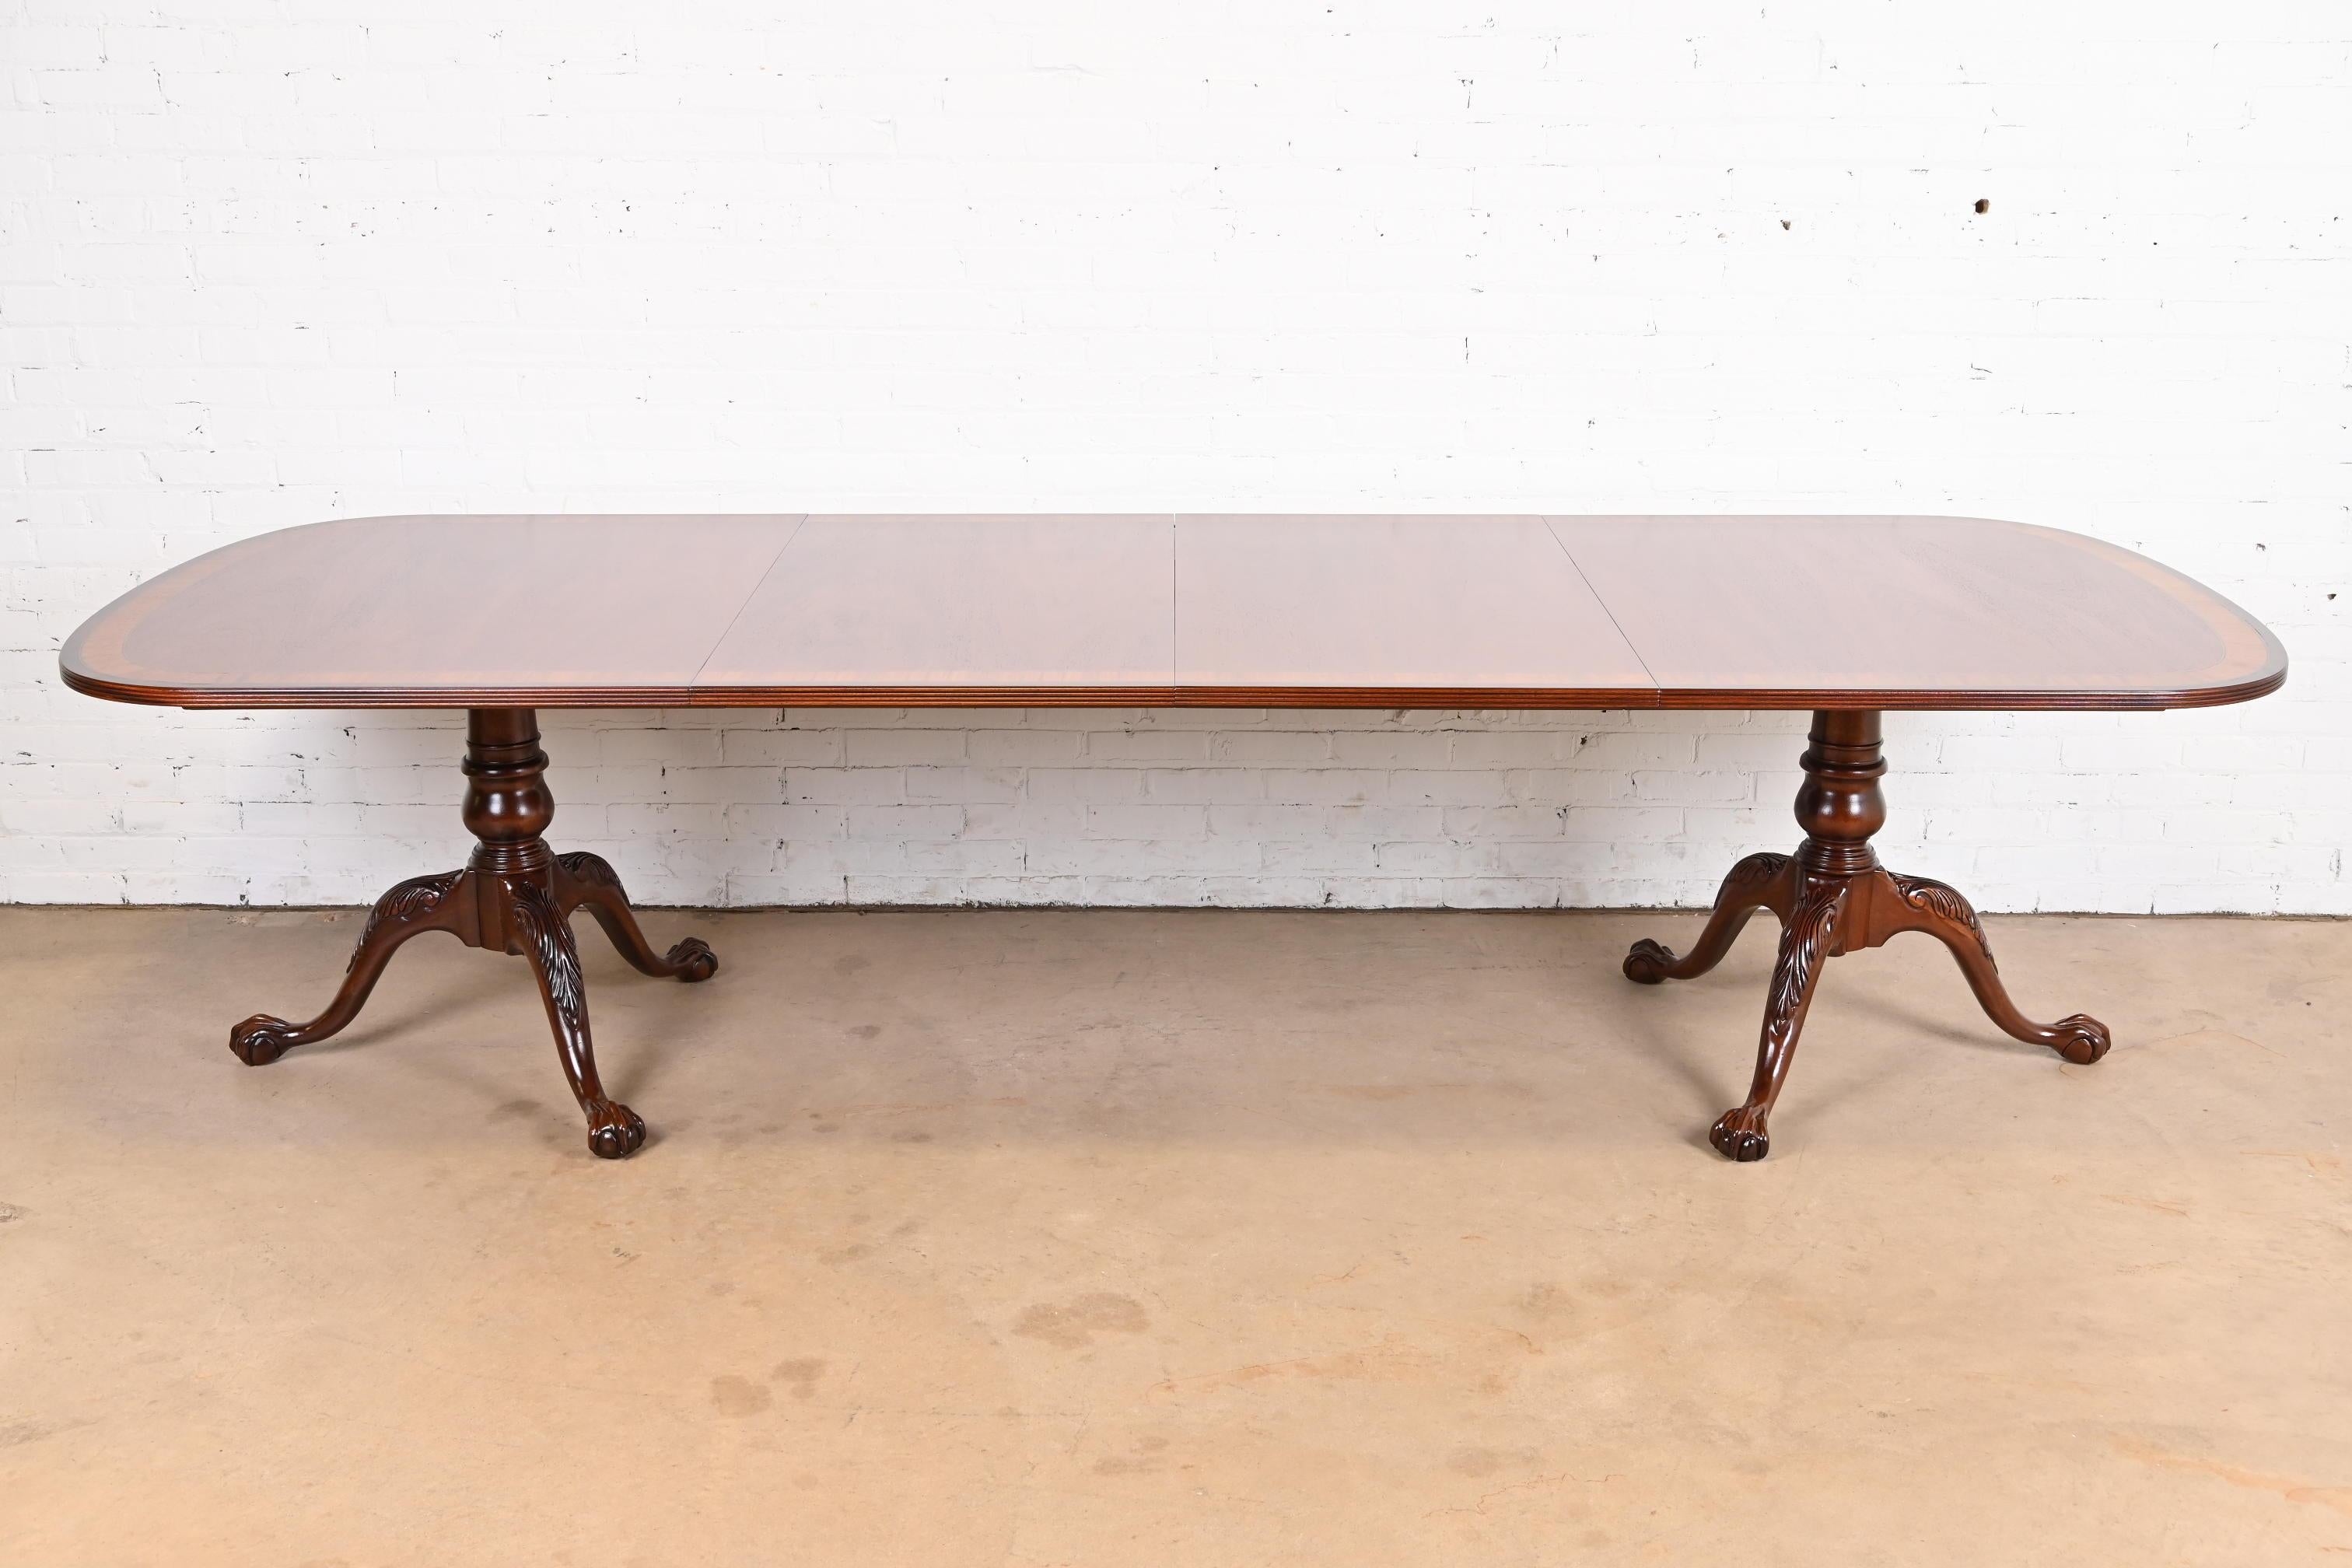 An exceptional Georgian or Chippendale style double pedestal extension dining table

In the manner of Baker Furniture

USA, Circa Late 20th Century

Gorgeous book-matched mahogany, with satinwood banding, and carved solid mahogany pedestals with